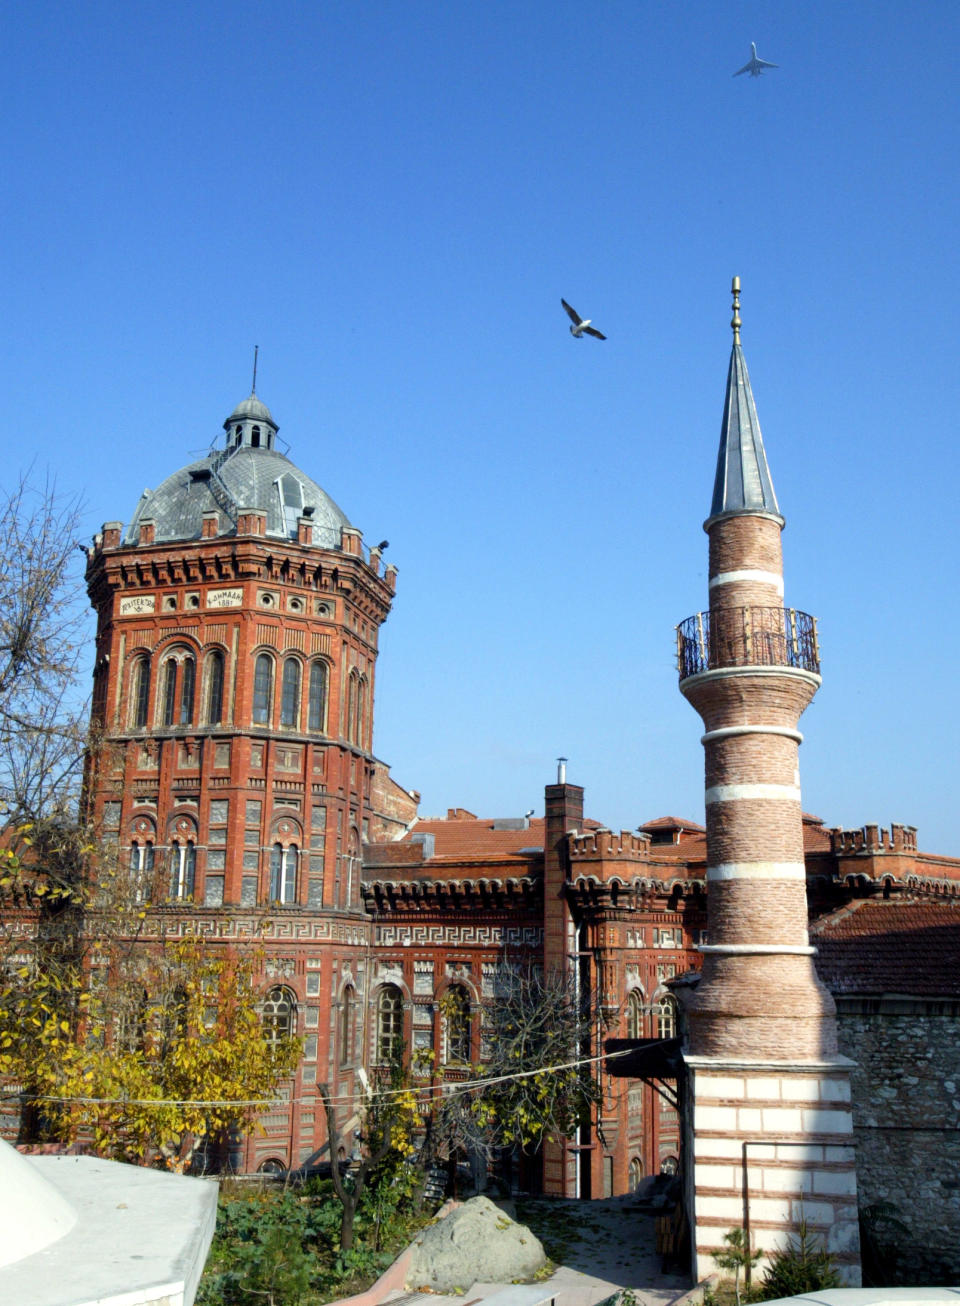 FILE - This Nov. 22, 2006 file photo shows Historical Greek Orthodox high school, left, next to a mosque in Istanbul's Fener neighborhood. Istanbul has a number of interesting neighborhoods worth exploring, with attractions ranging from well-known landmarks like this to small shops, galleries and cafes. (AP Photo/Osman Orsal, File)